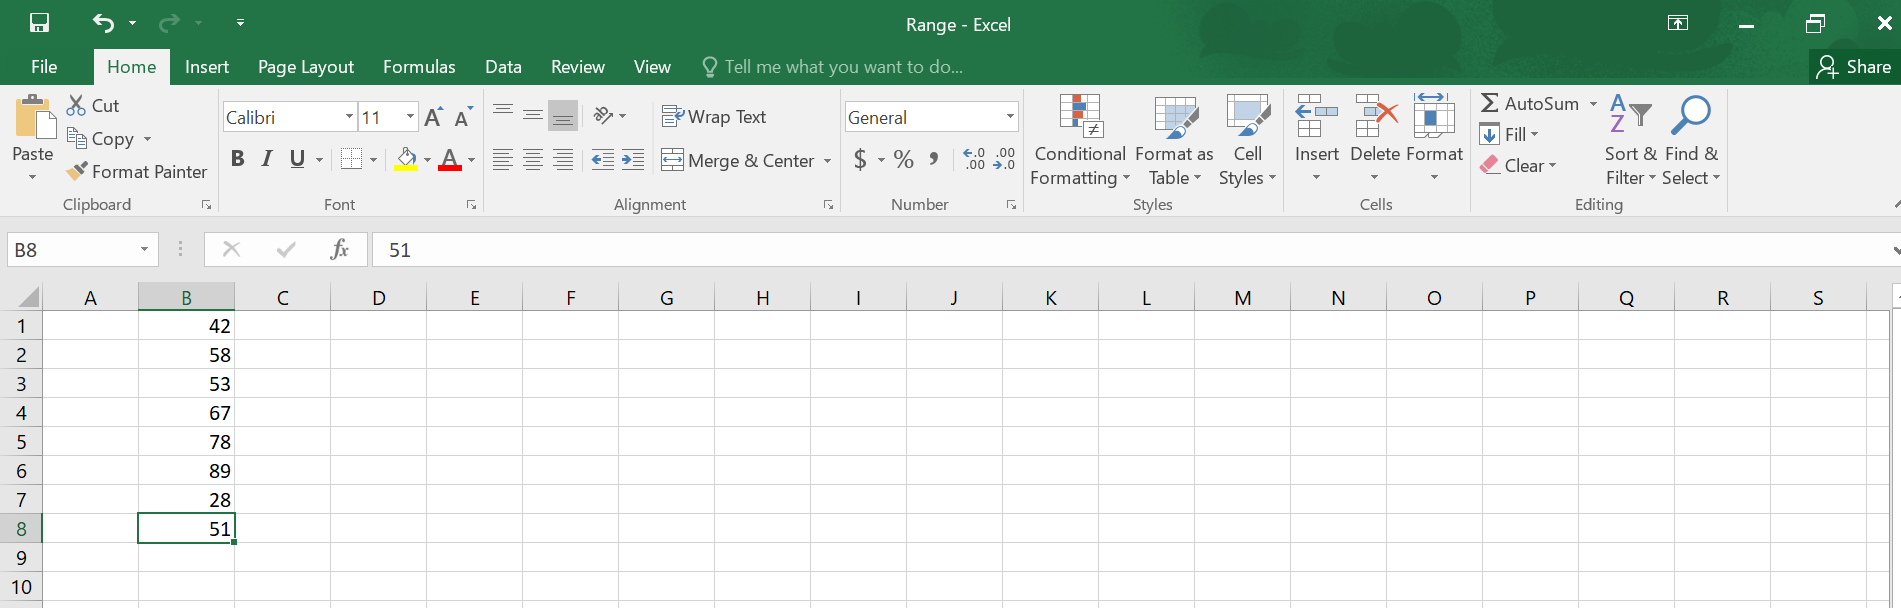 how-to-calculate-range-in-excel